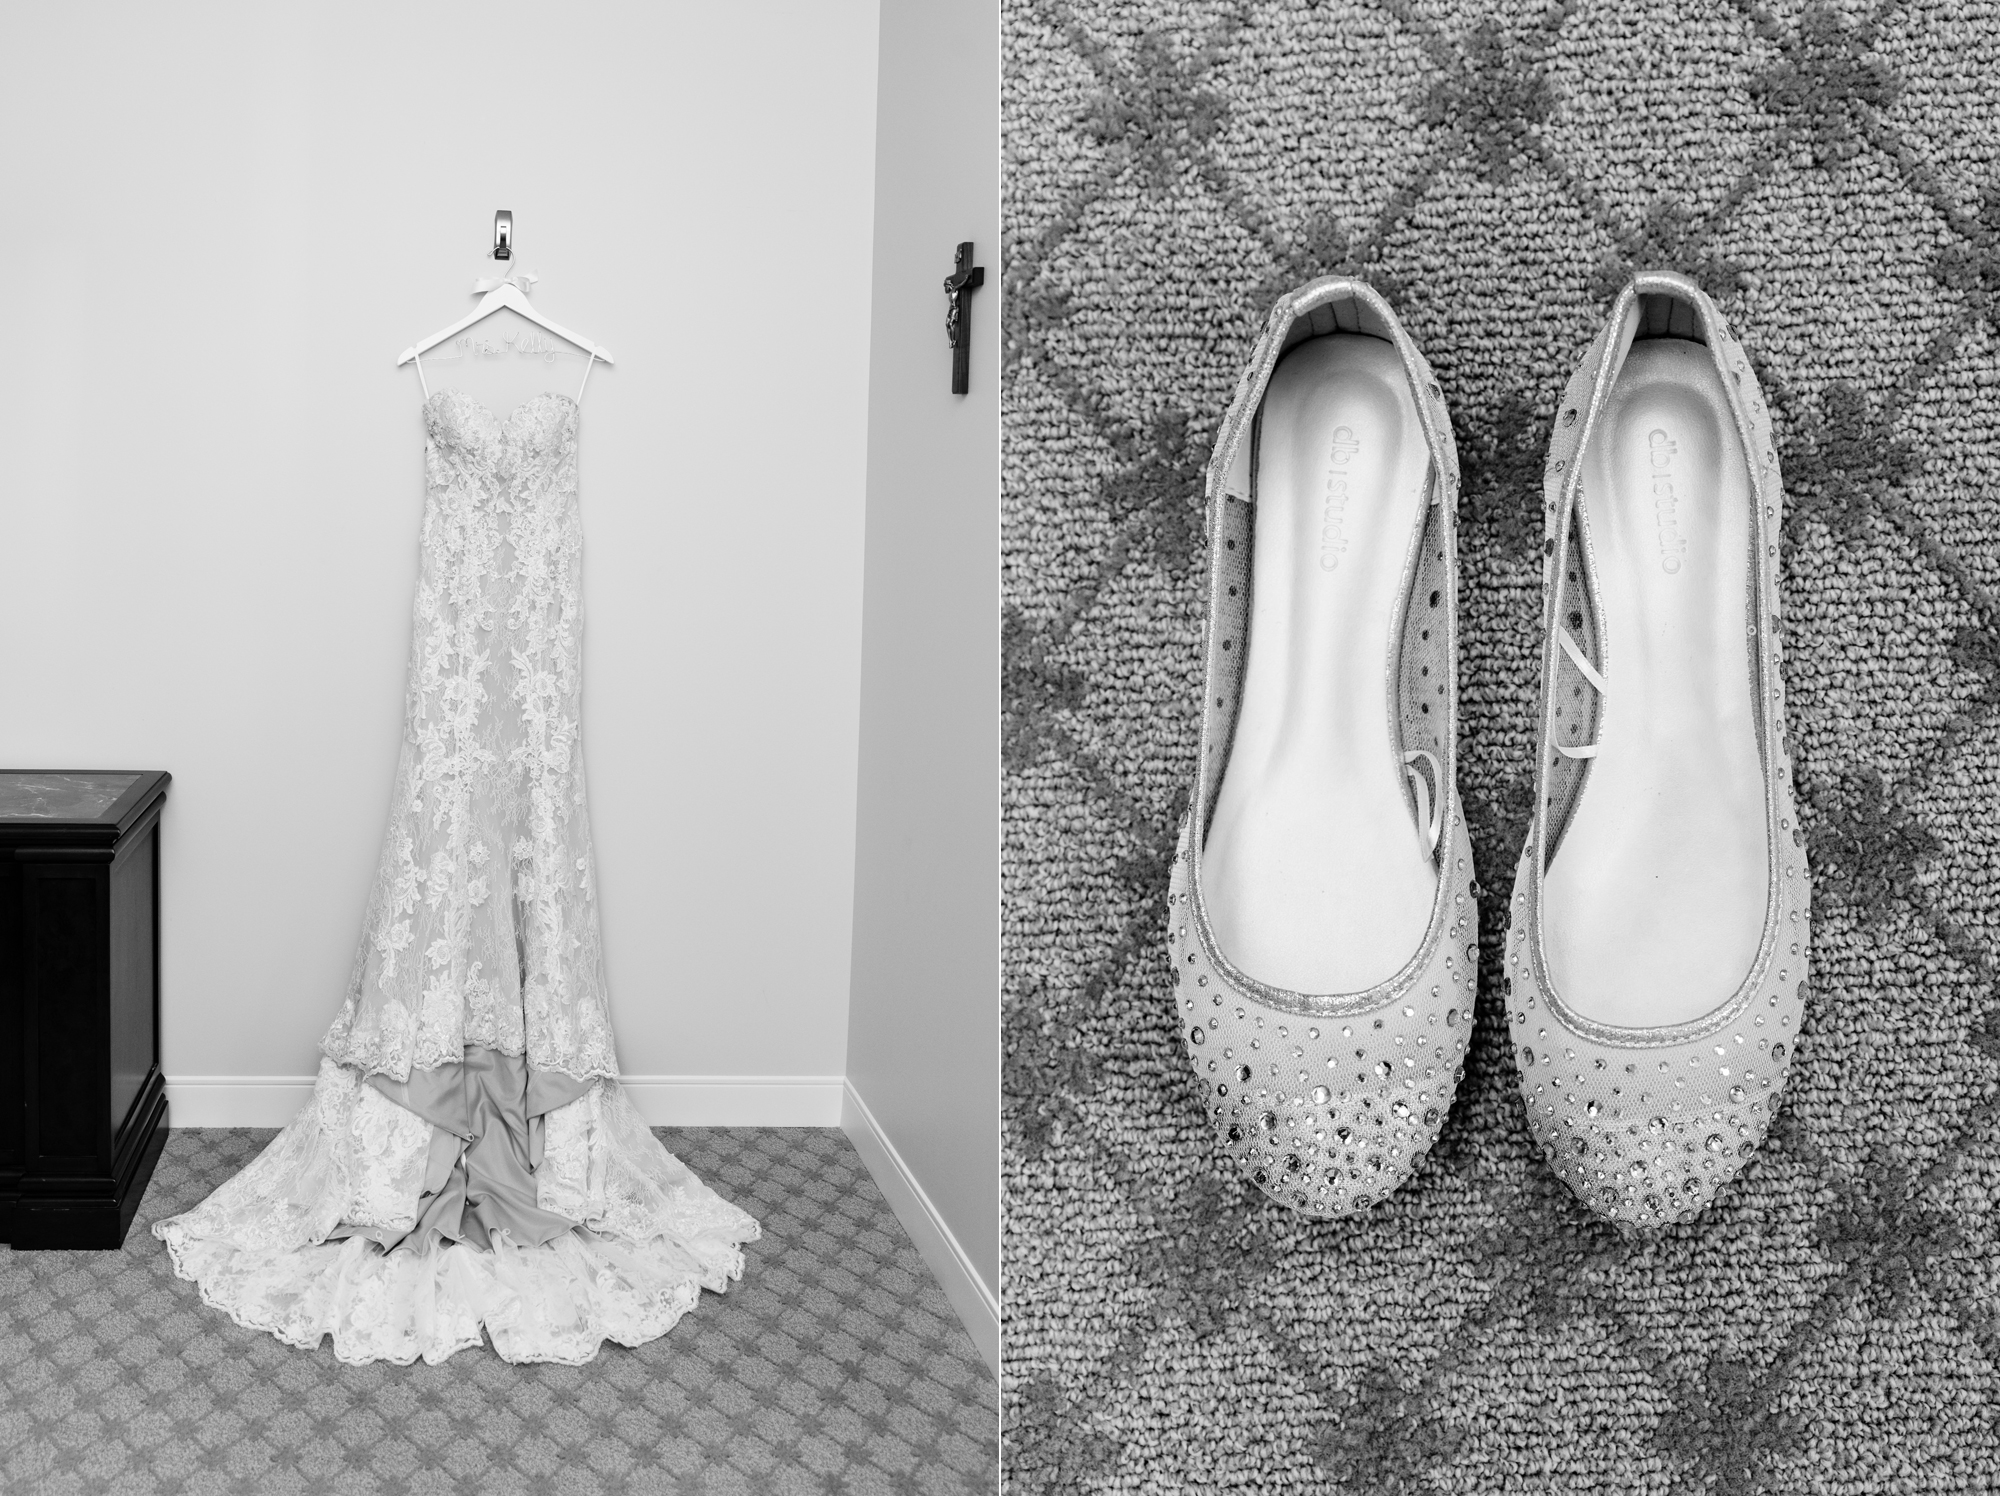 Bride’s Details for her wedding ceremony at the Basilica of the Sacred Heart on the campus of the University of Notre Dame